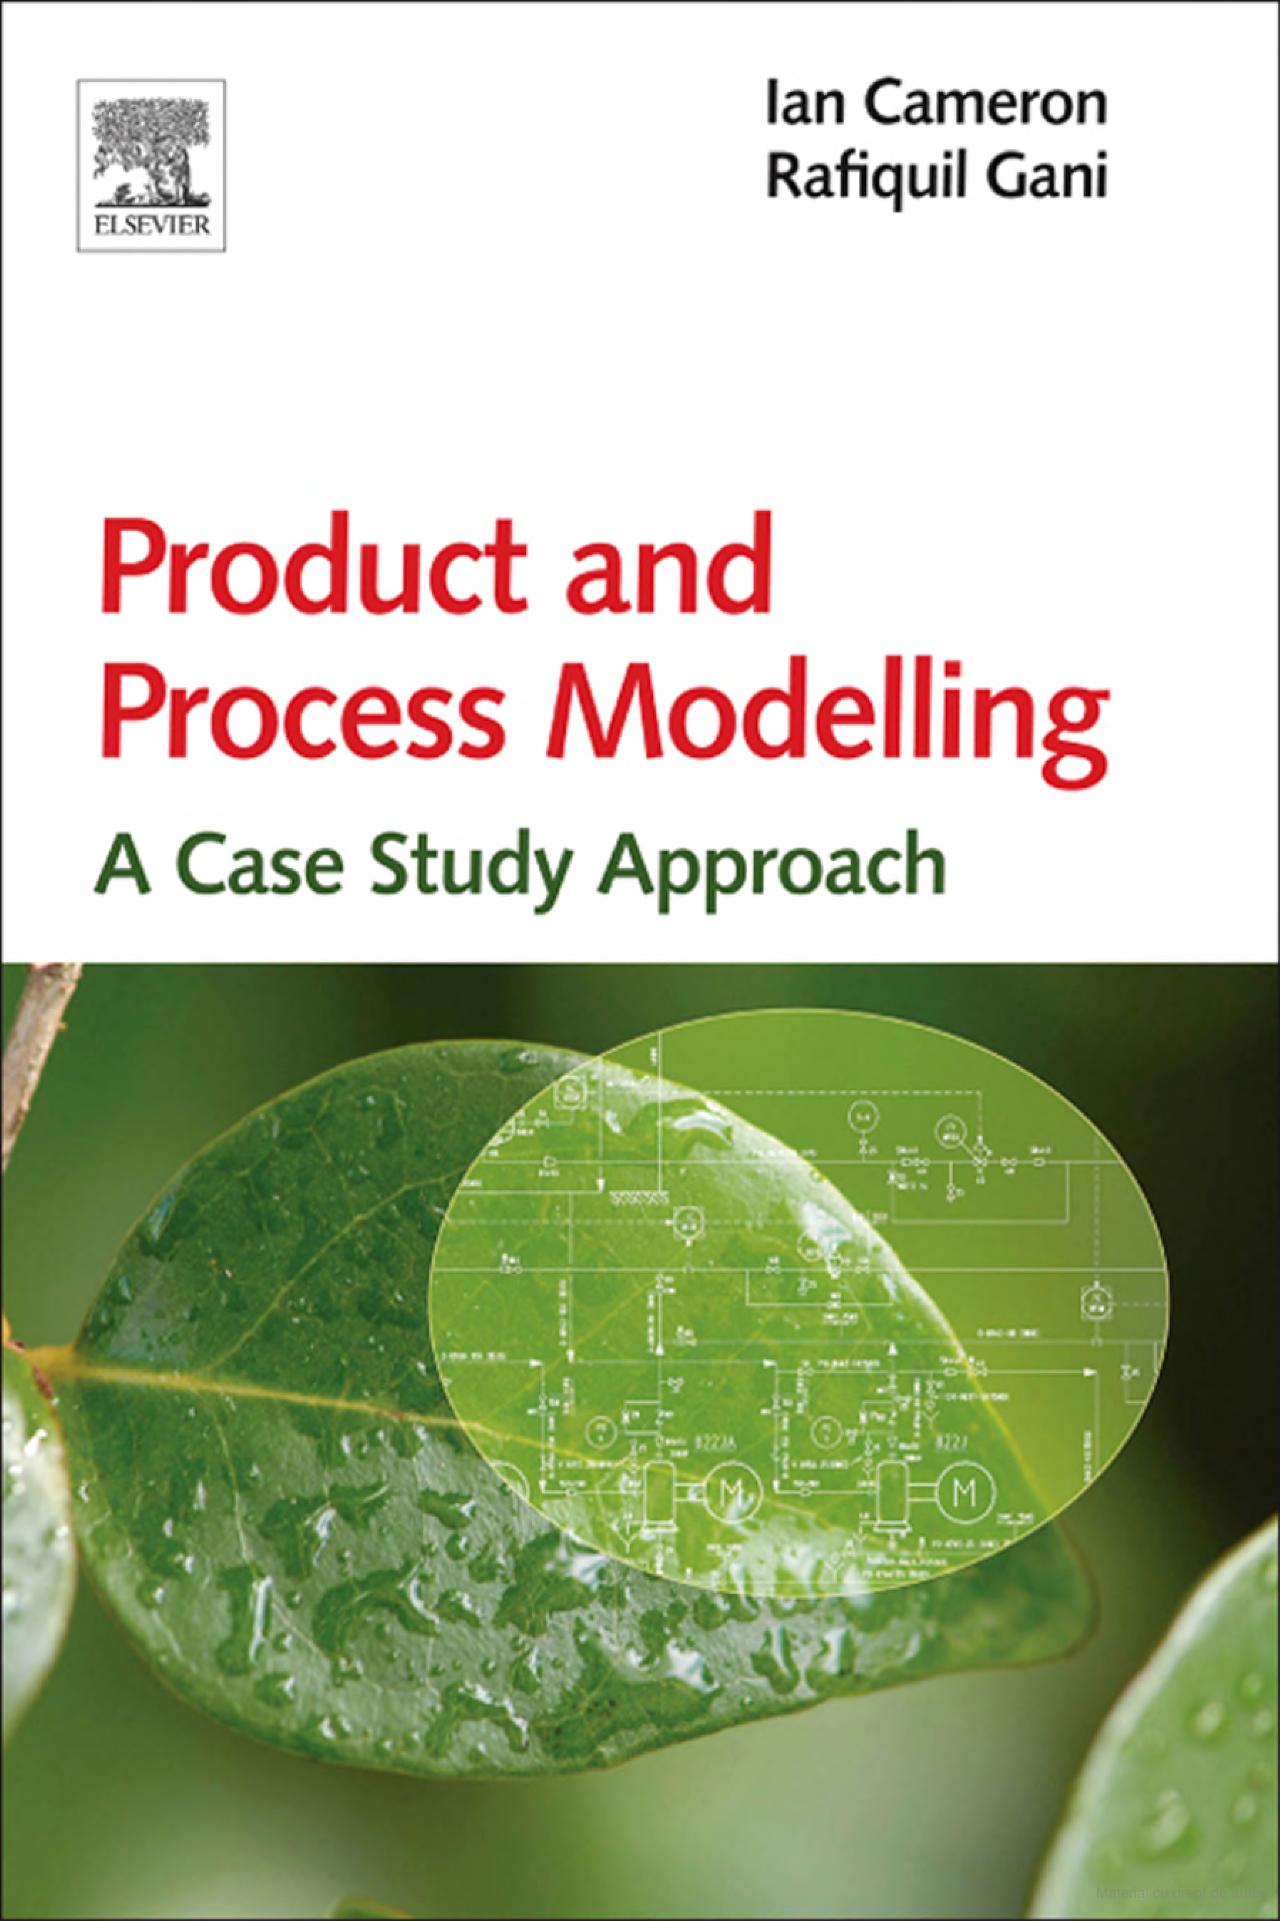 product engineering case study